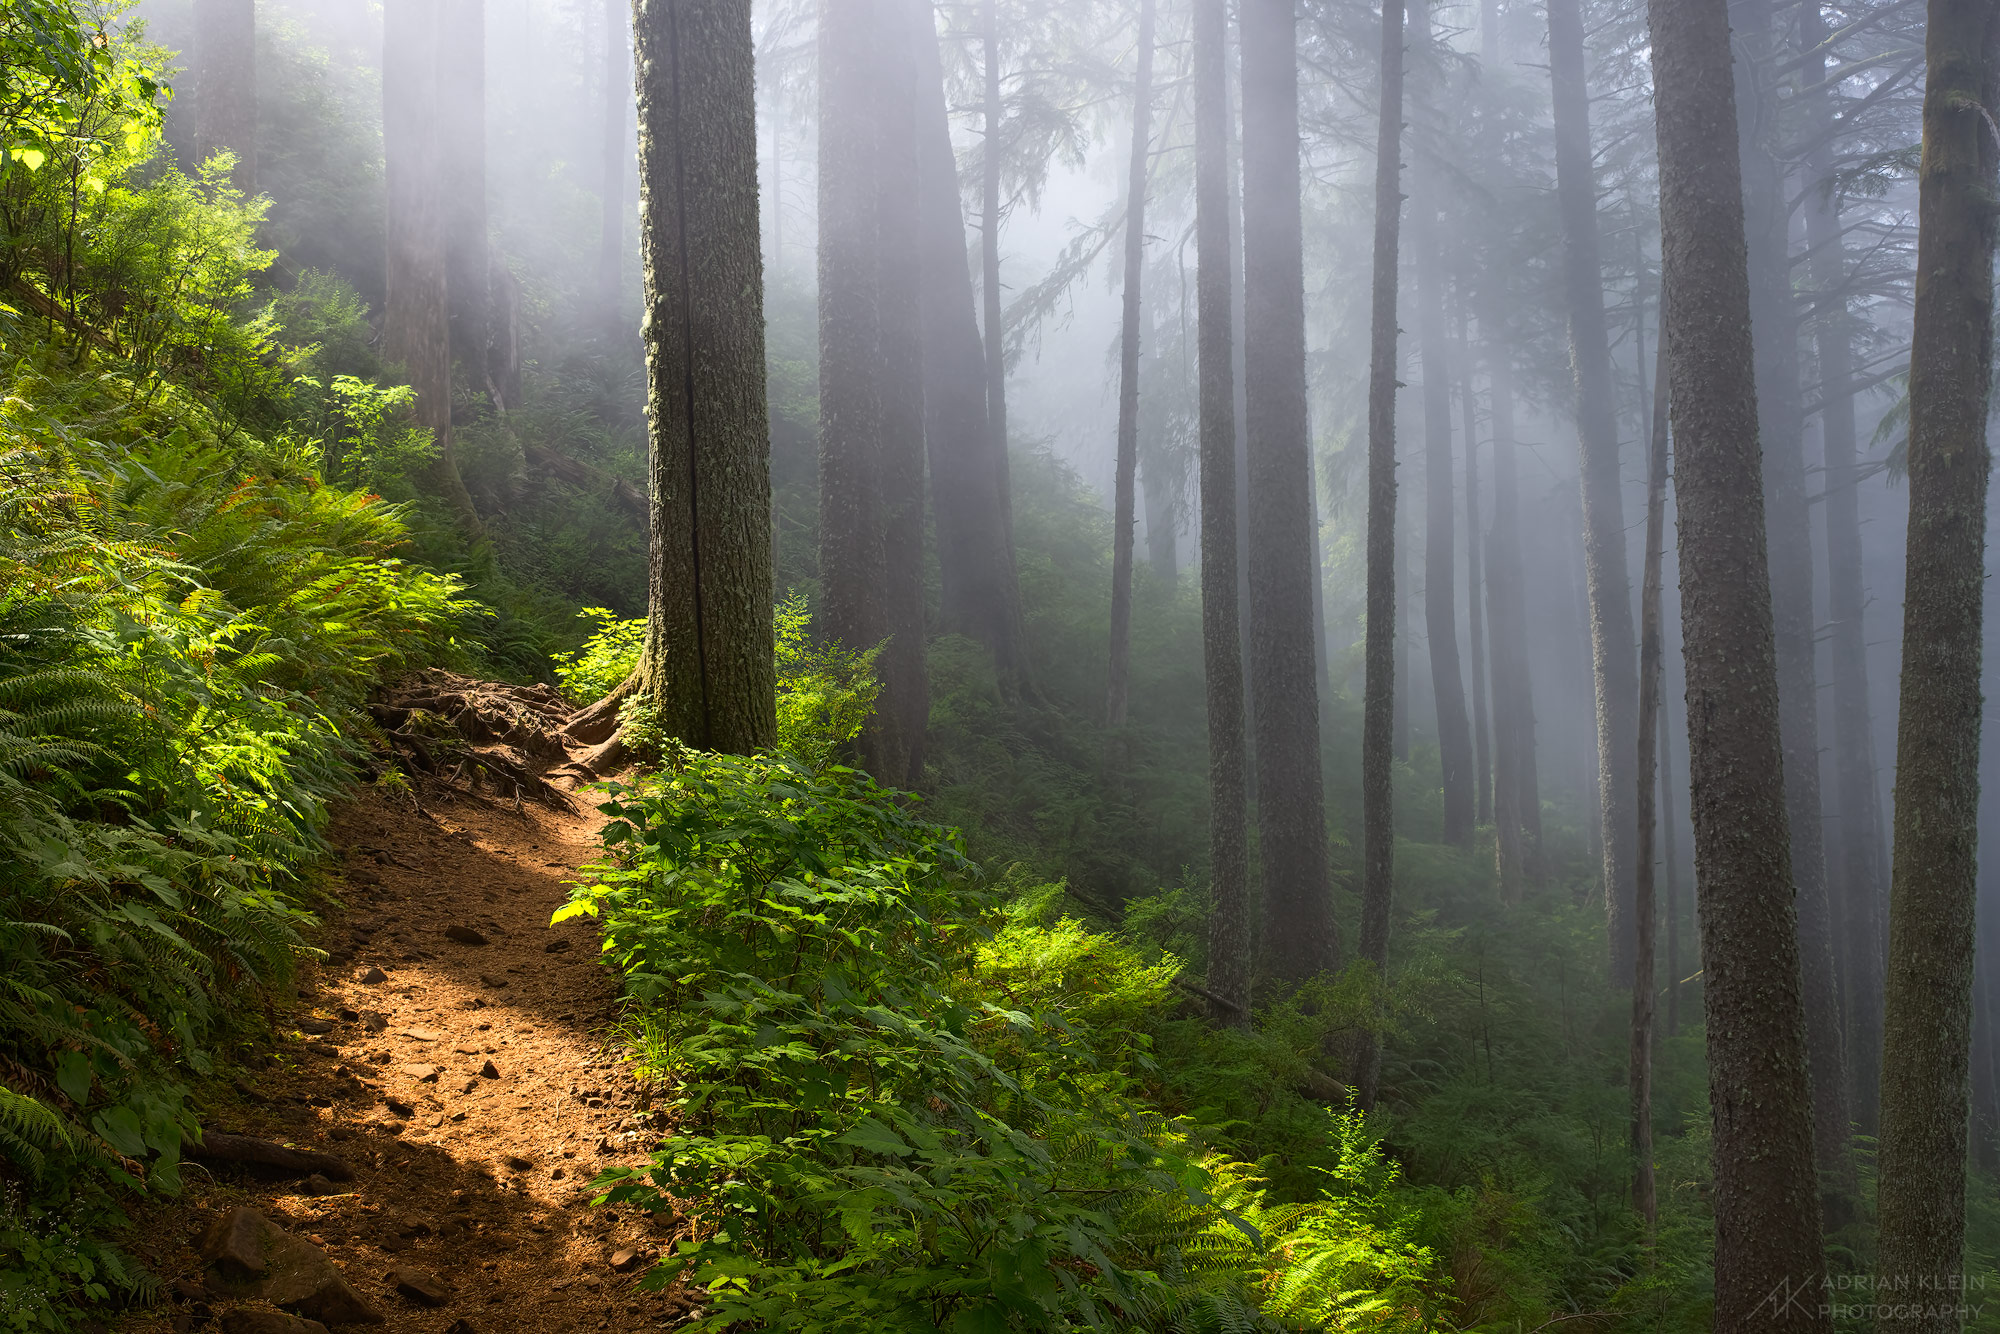 The afternoon sunlight finally finds it's way through the dense fog in a forest near the Oregon Coast.